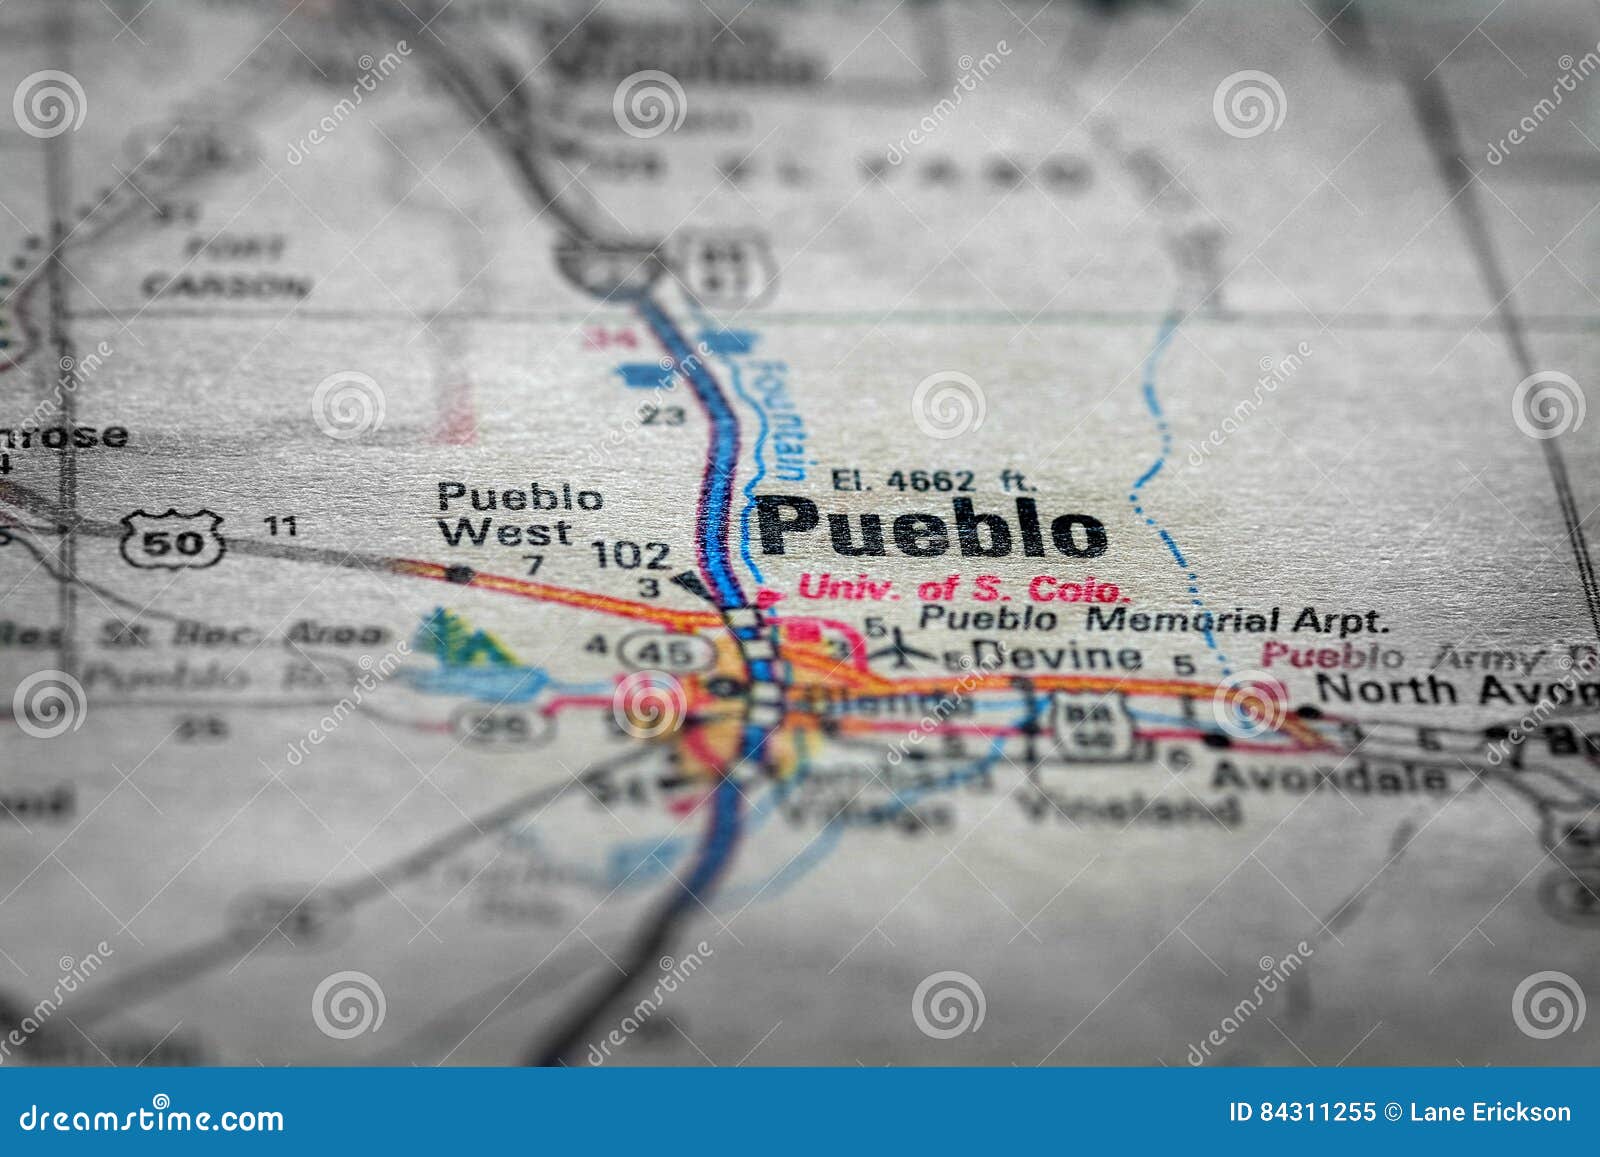 map view for travel to locations and destinations pueblo colorado